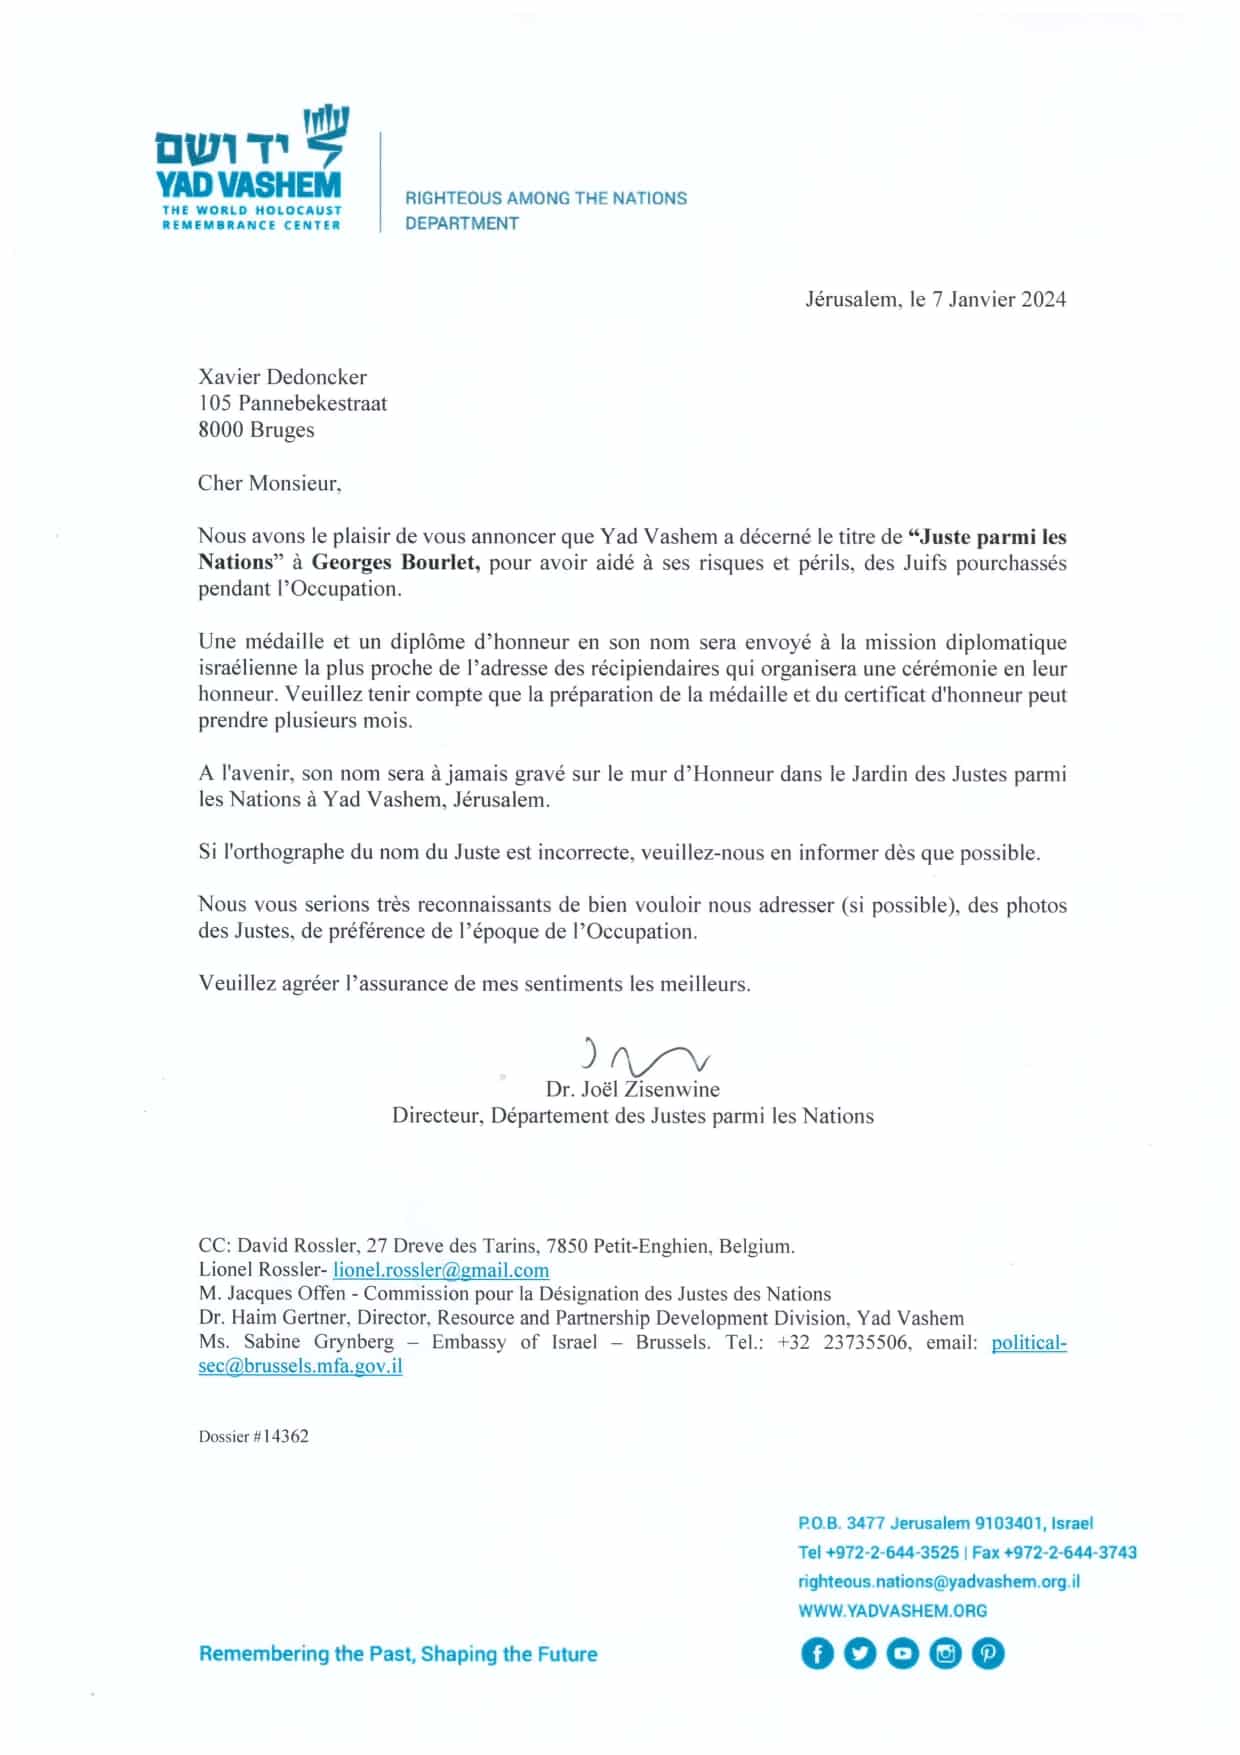 The official letter of recognition from Yad Vashem